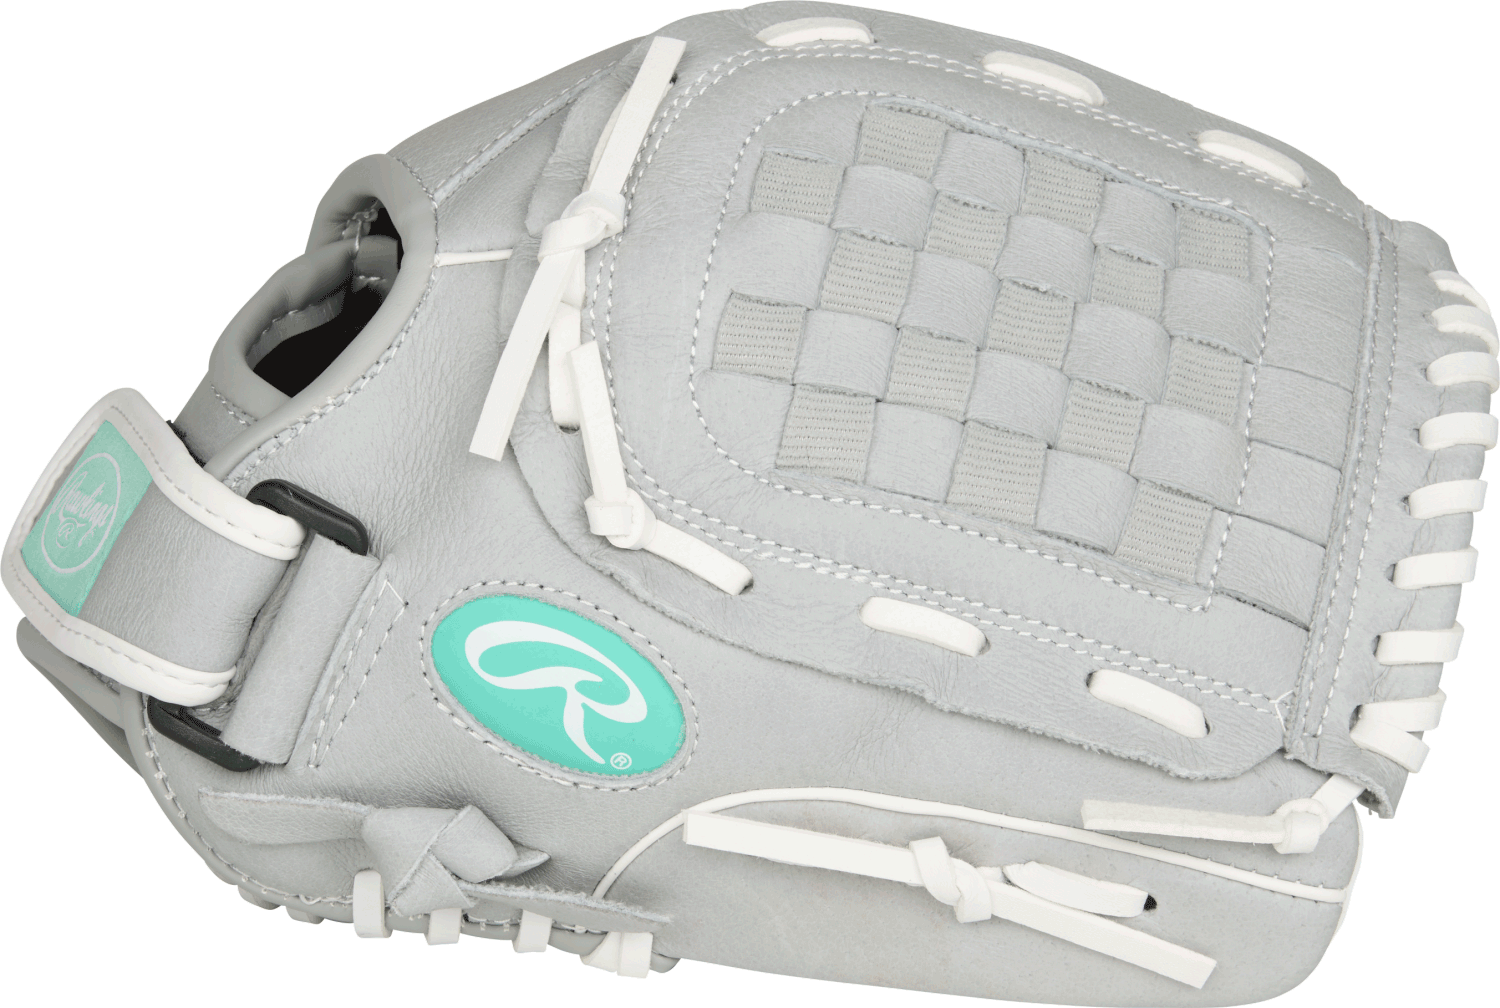 Rawlings Sure Catch Softball SCSB115M-6/0 11.5"